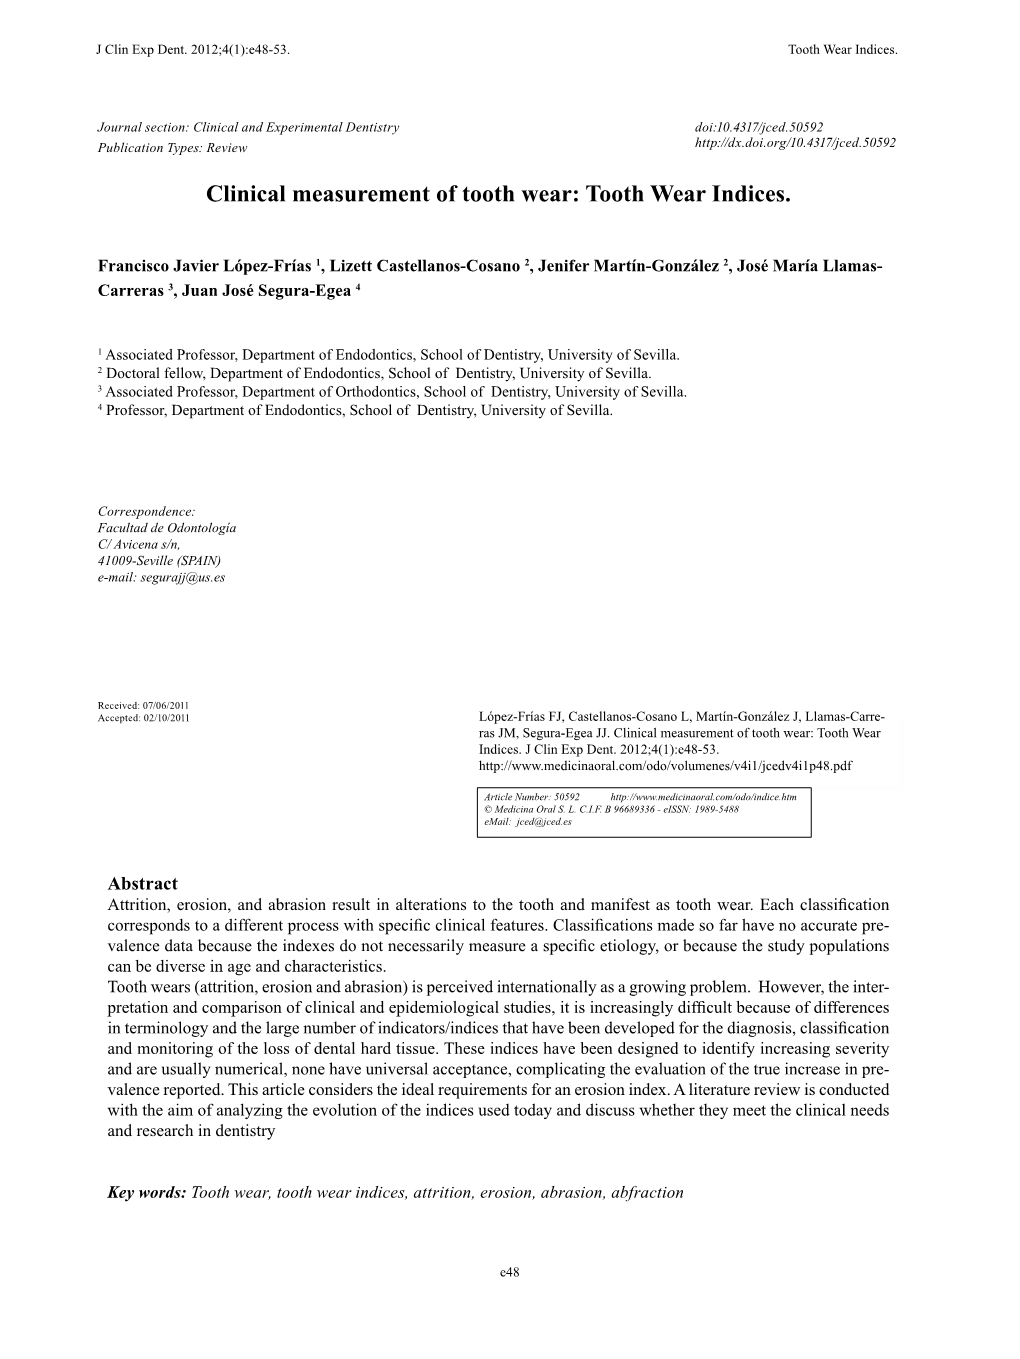 Clinical Measurement of Tooth Wear: Tooth Wear Indices